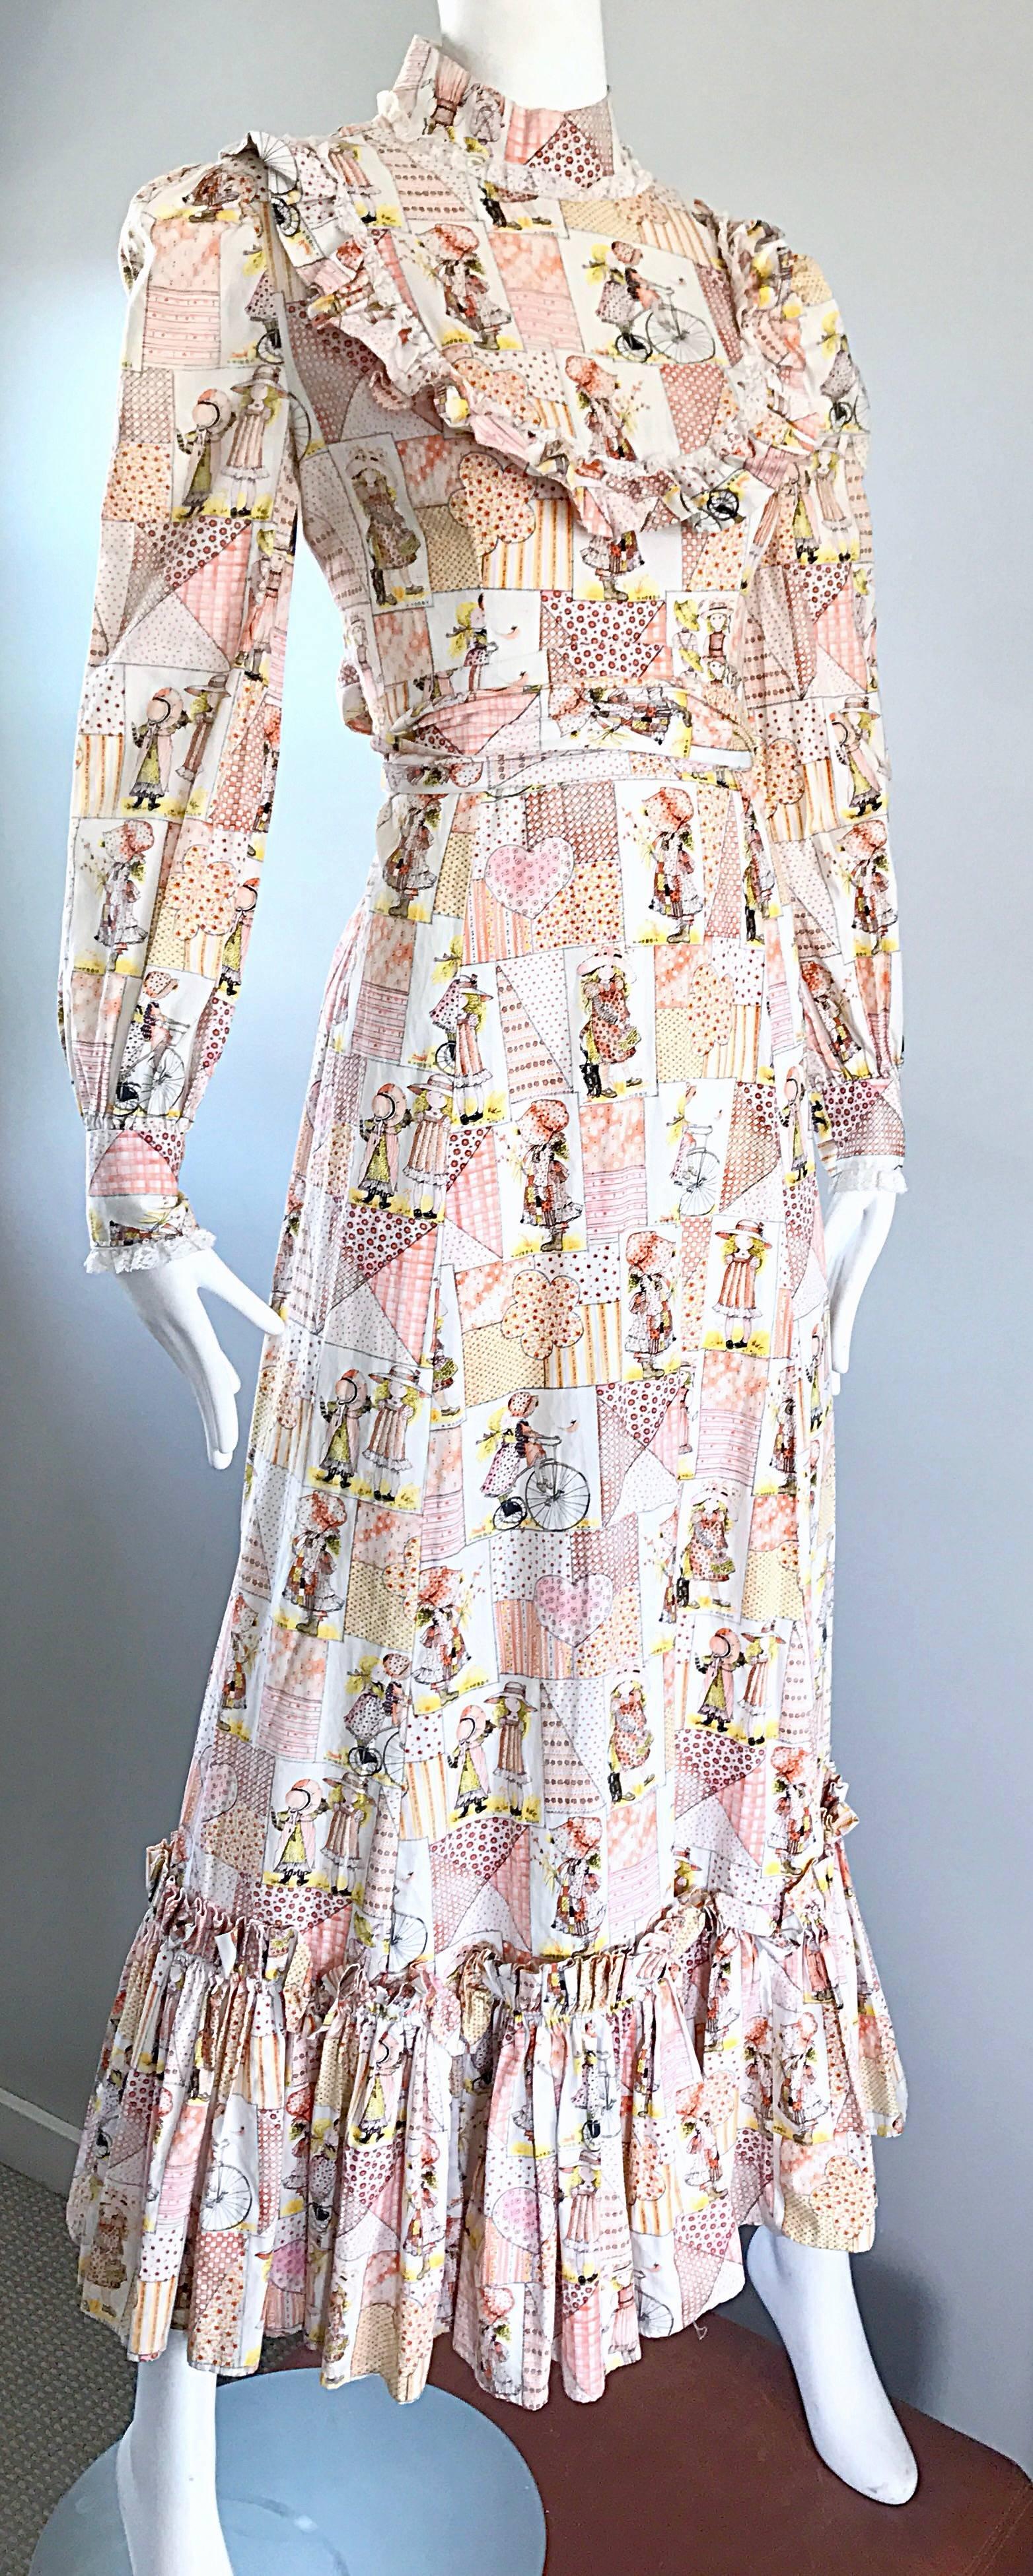 1970s Holly Hobbie Novelty Print Victorian Inspired Cotton Vintage Maxi Dress 1